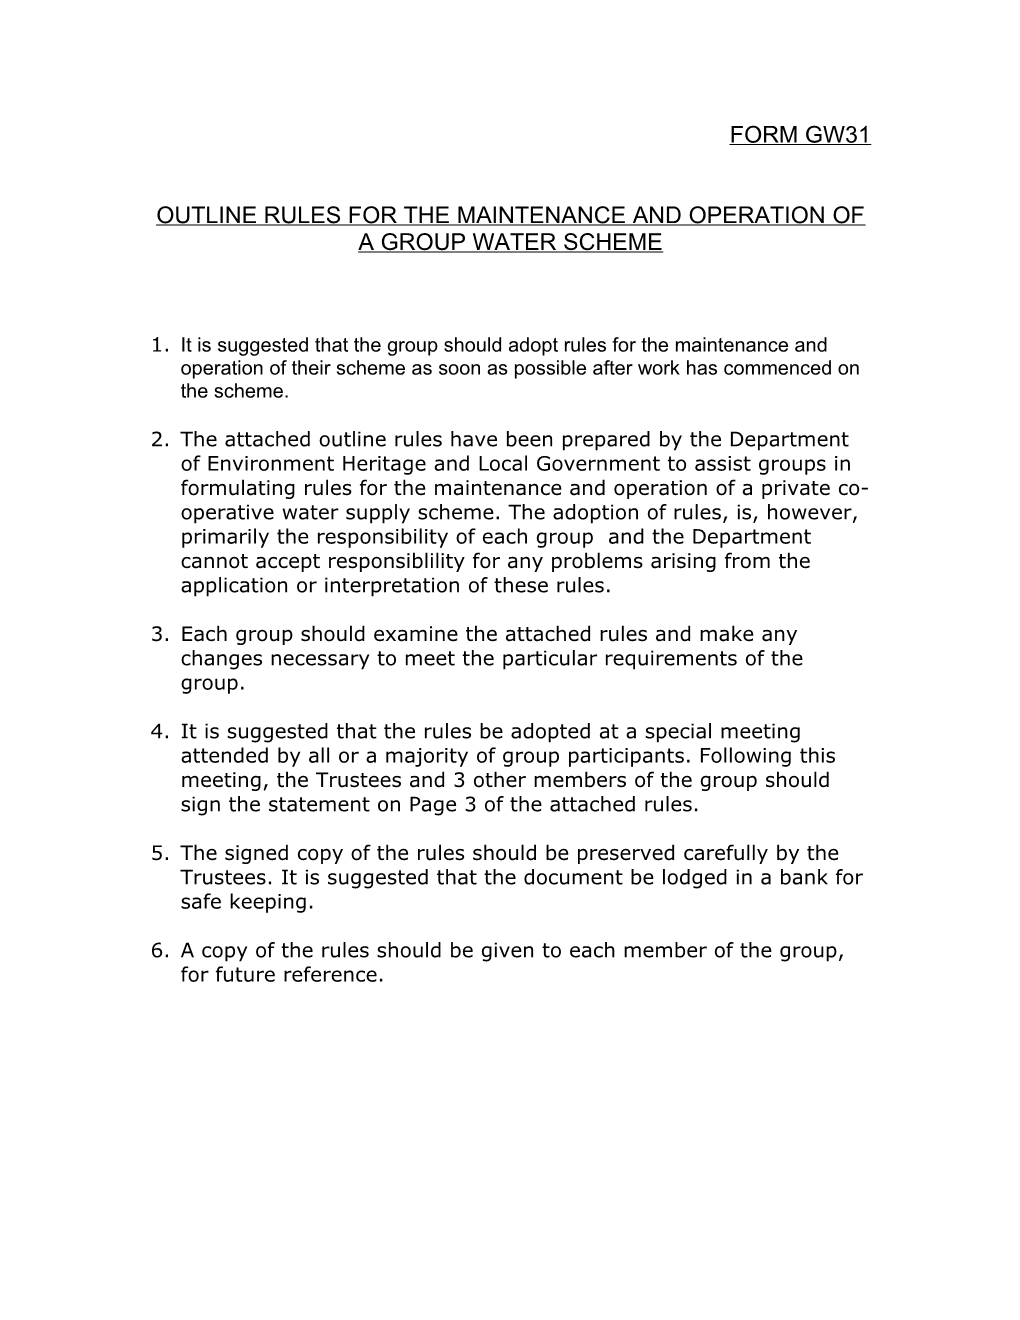 Outline Rules for the Maintenance and Operation of a Group Water Scheme